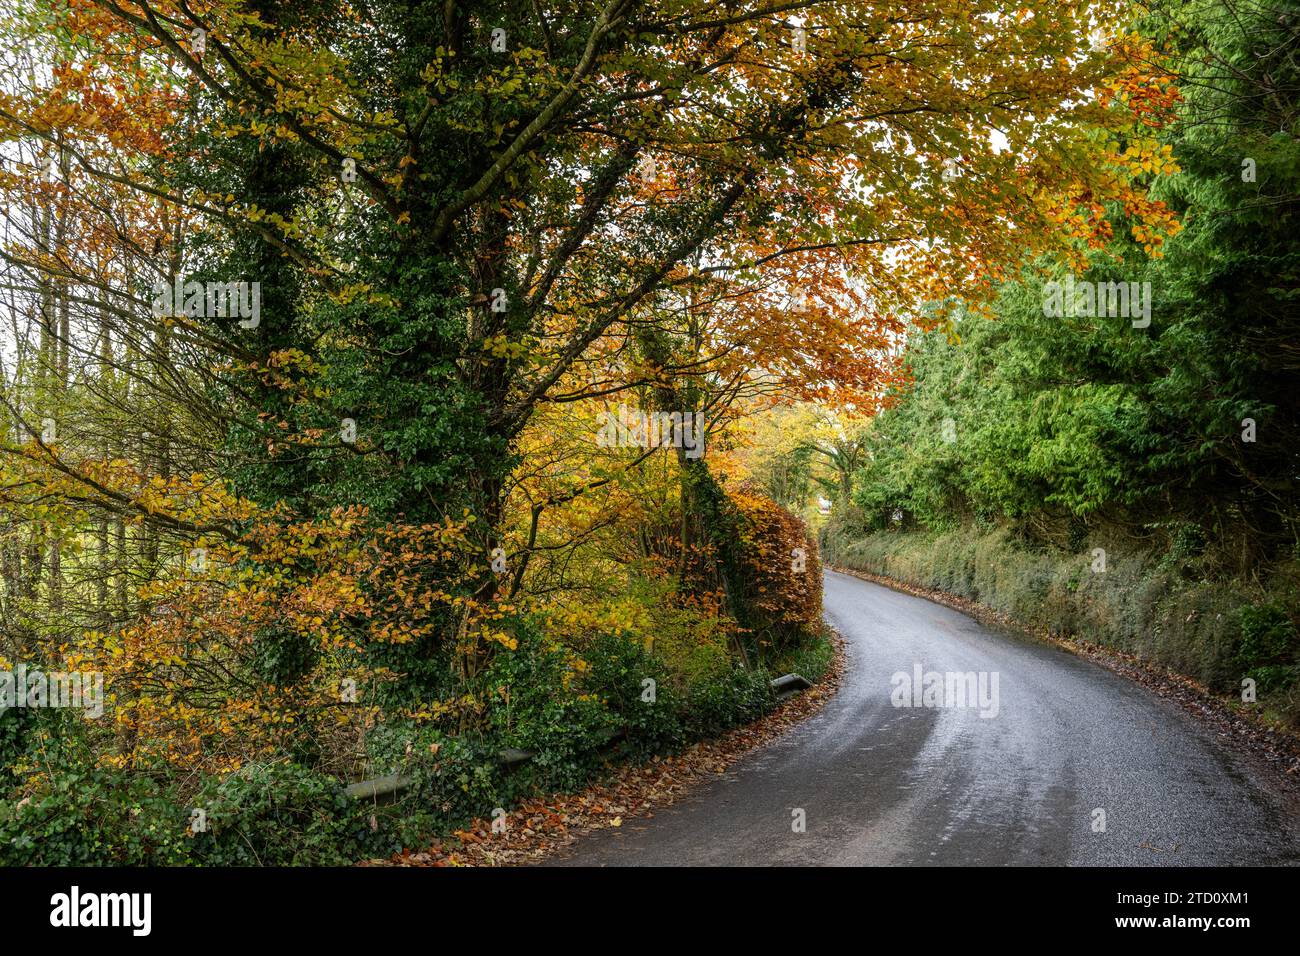 Autumn leaves on a country road in Ireland. Stock Photo